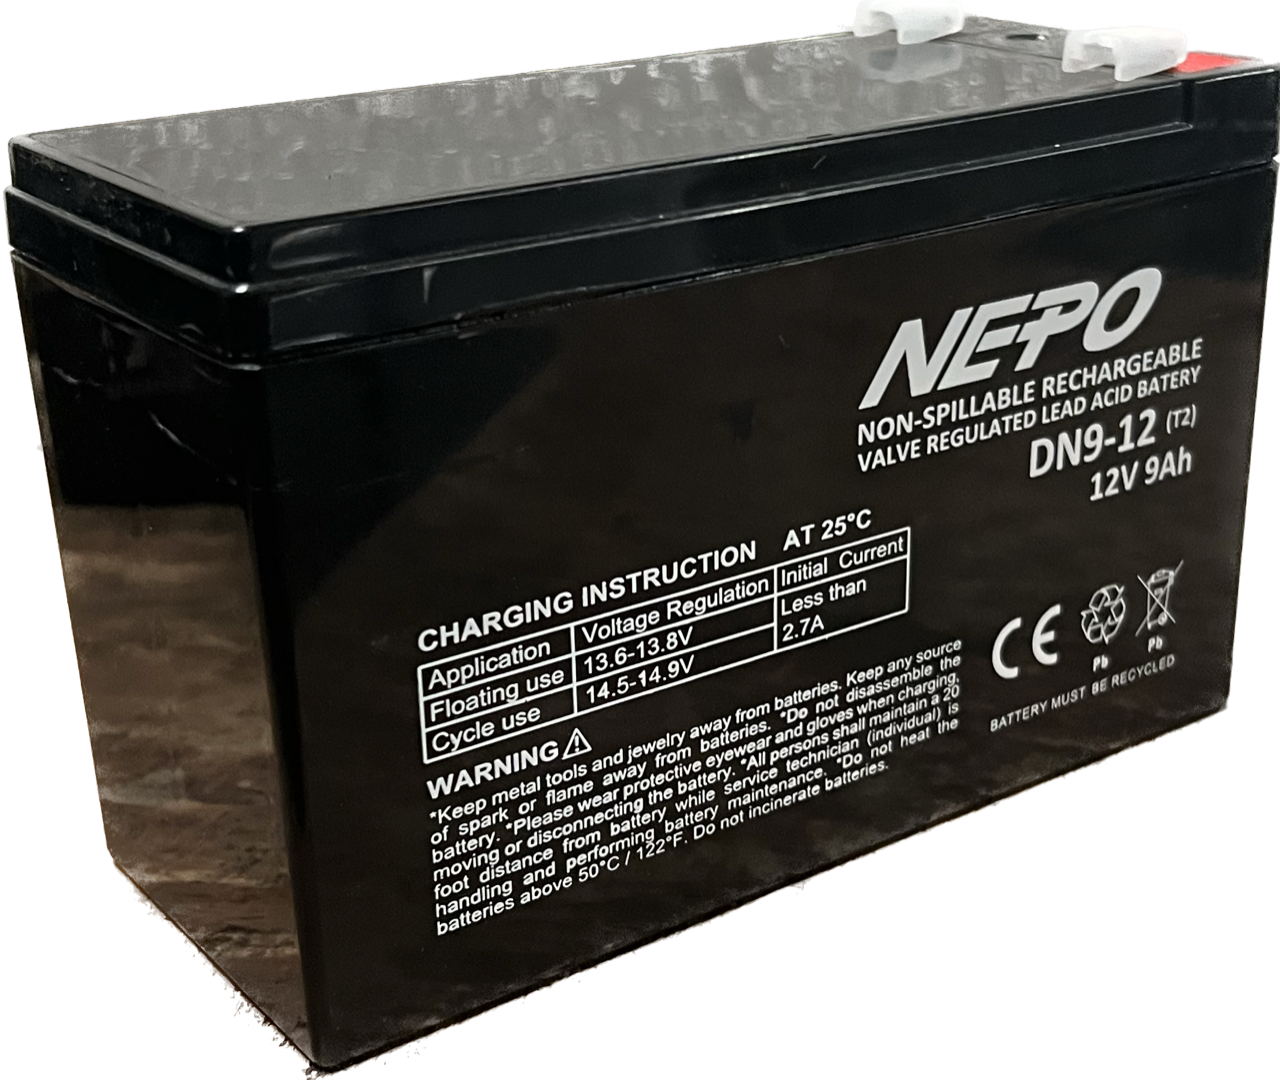 Recycling a battery backup system in San Diego. The UPS battery recycling is a service that allows the...